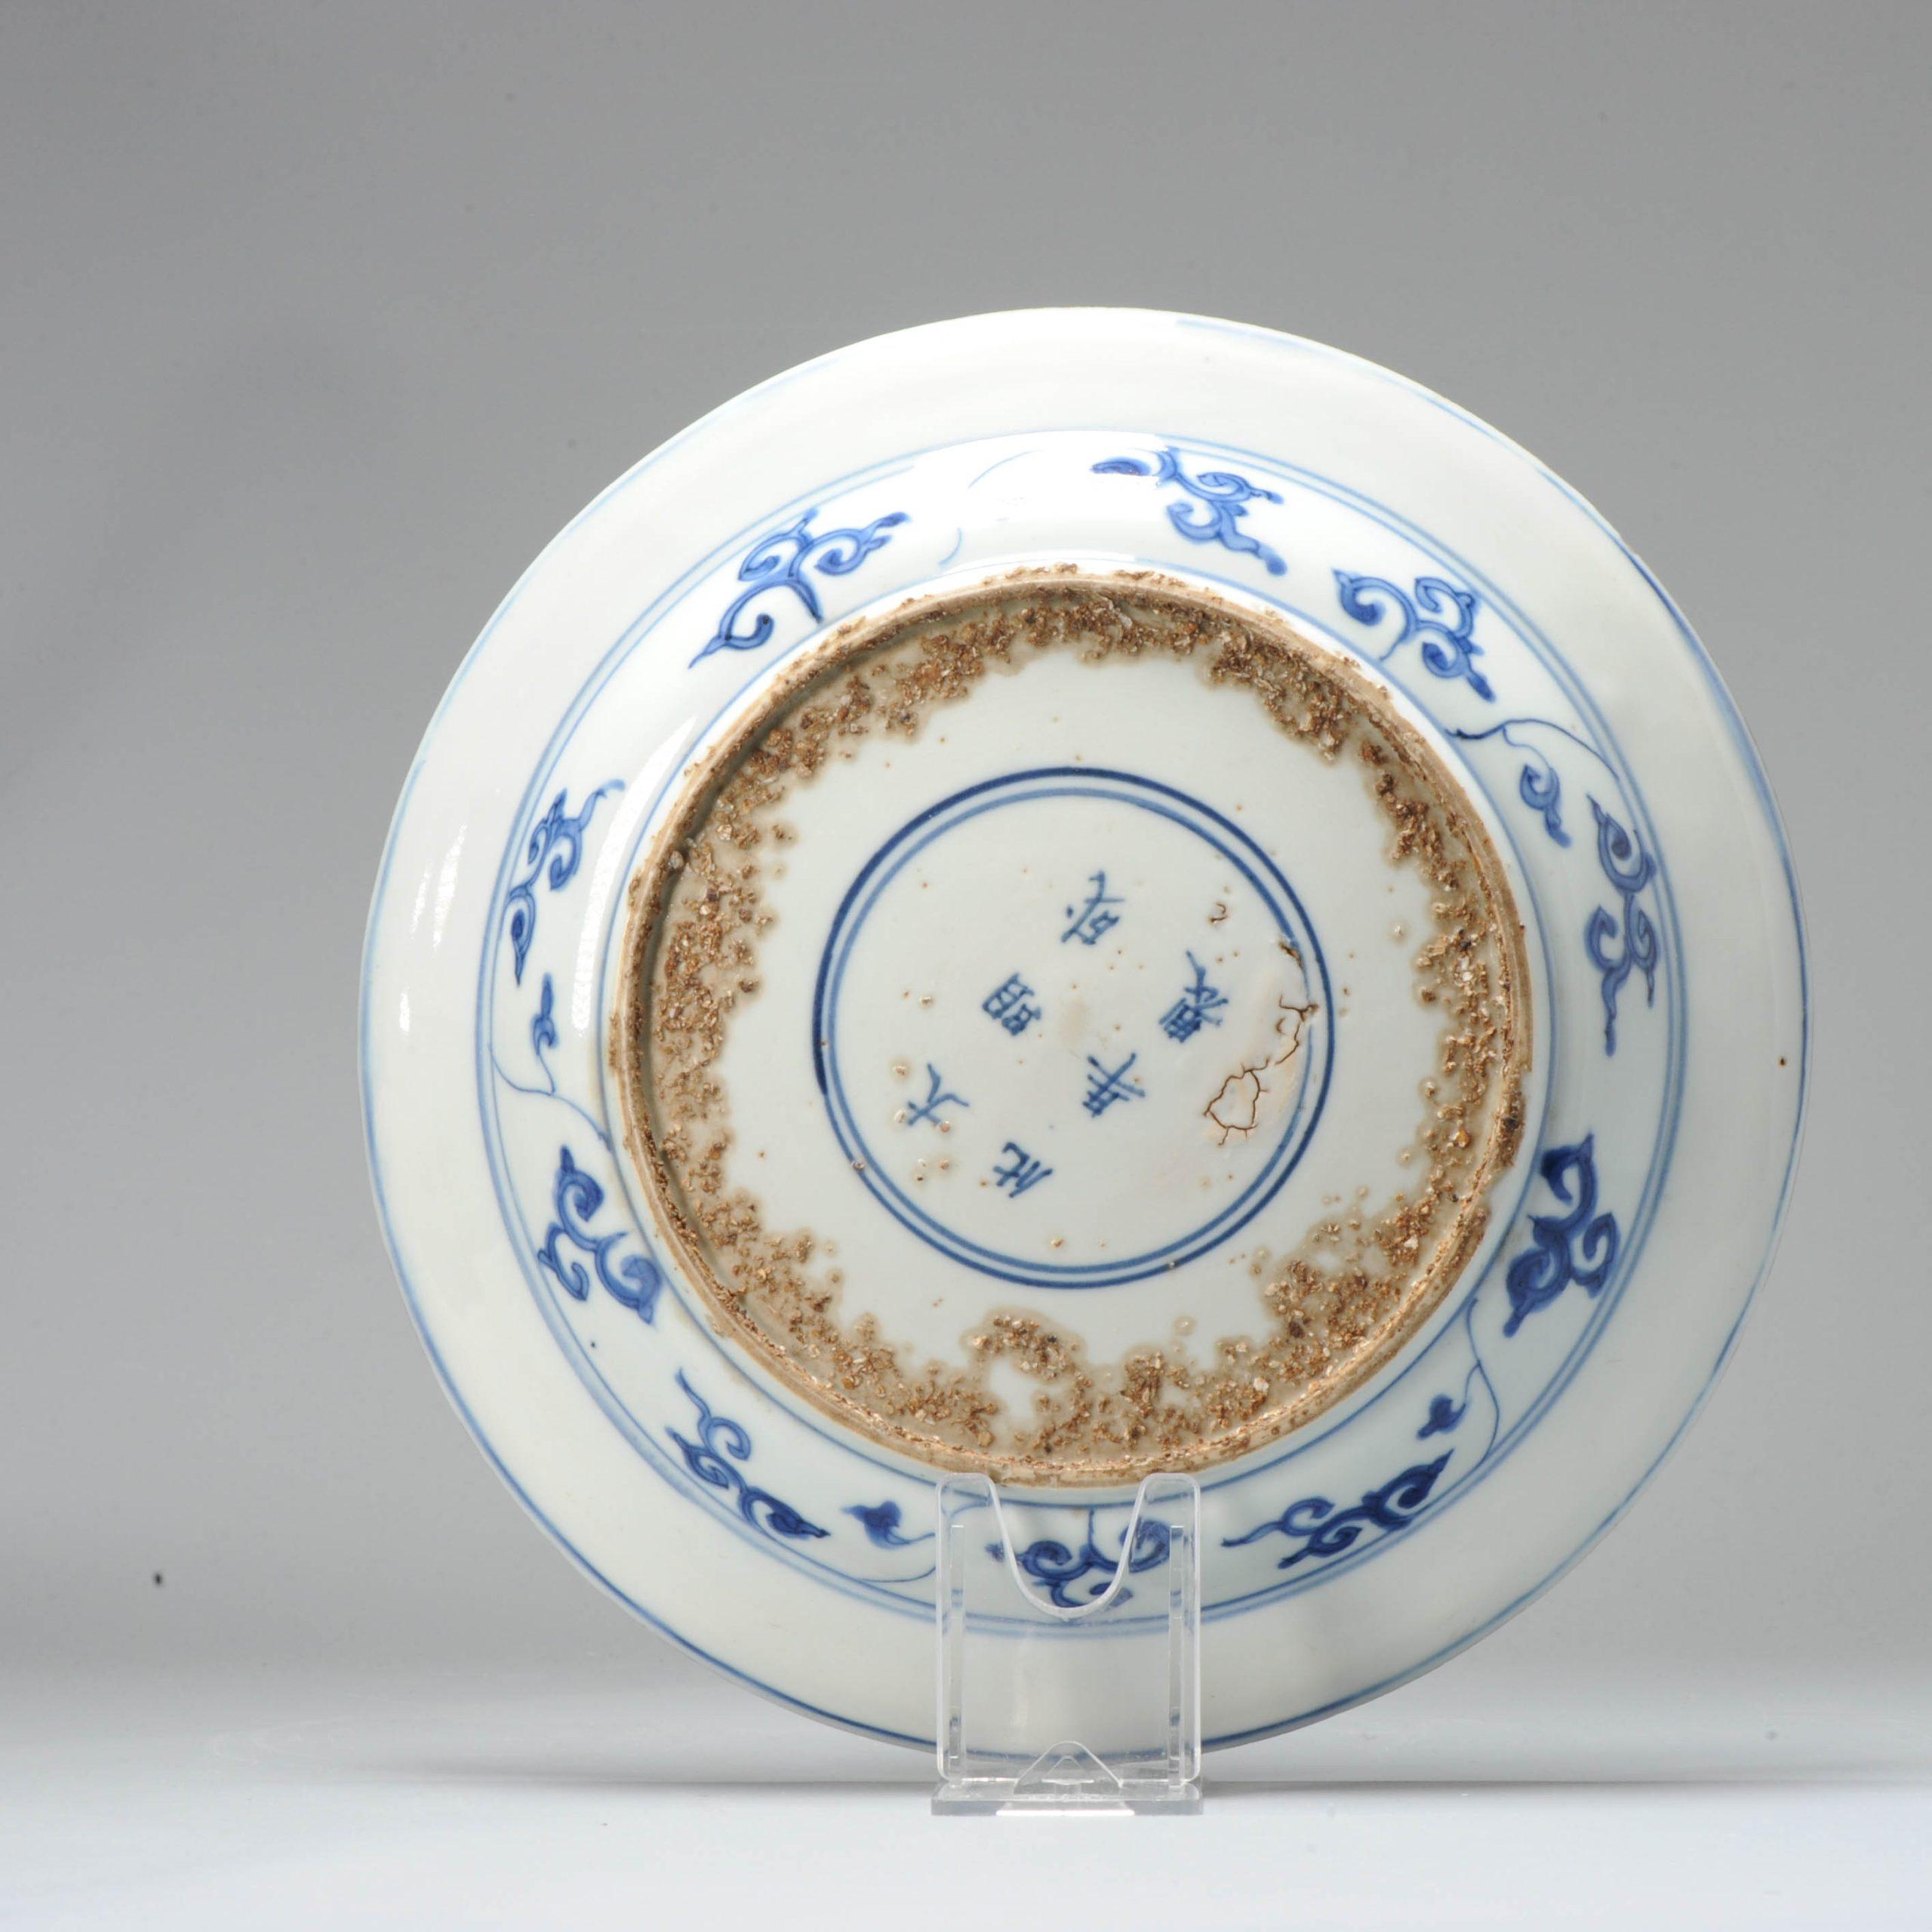 Rare Kosometsuke Antique Chinese Ming Dynasty Plate China Porcelain, 17th C In Good Condition For Sale In Amsterdam, Noord Holland